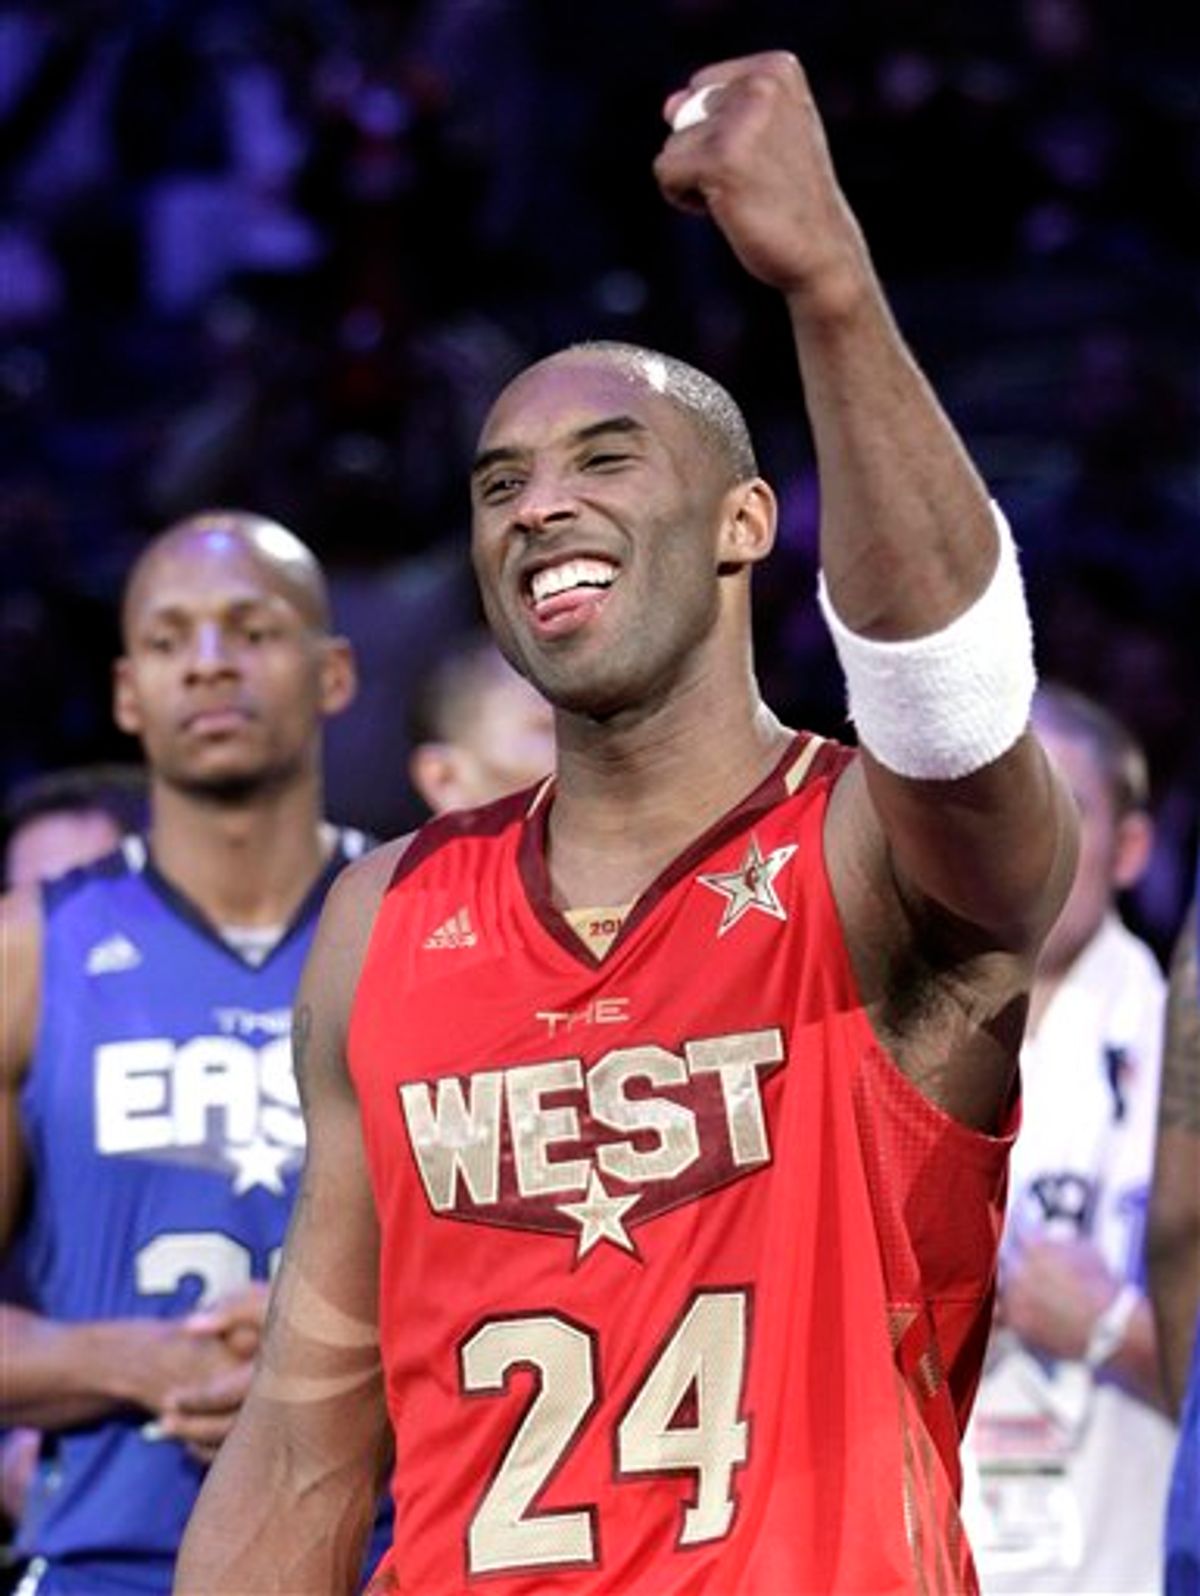 West's Kobe Bryant celebrates his team's 148-143 win against the East All-Star team after the NBA basketball All-Star Game in Los Angeles, Sunday, Feb. 20, 2011. (AP Photo/Jae C. Hong)  (AP)